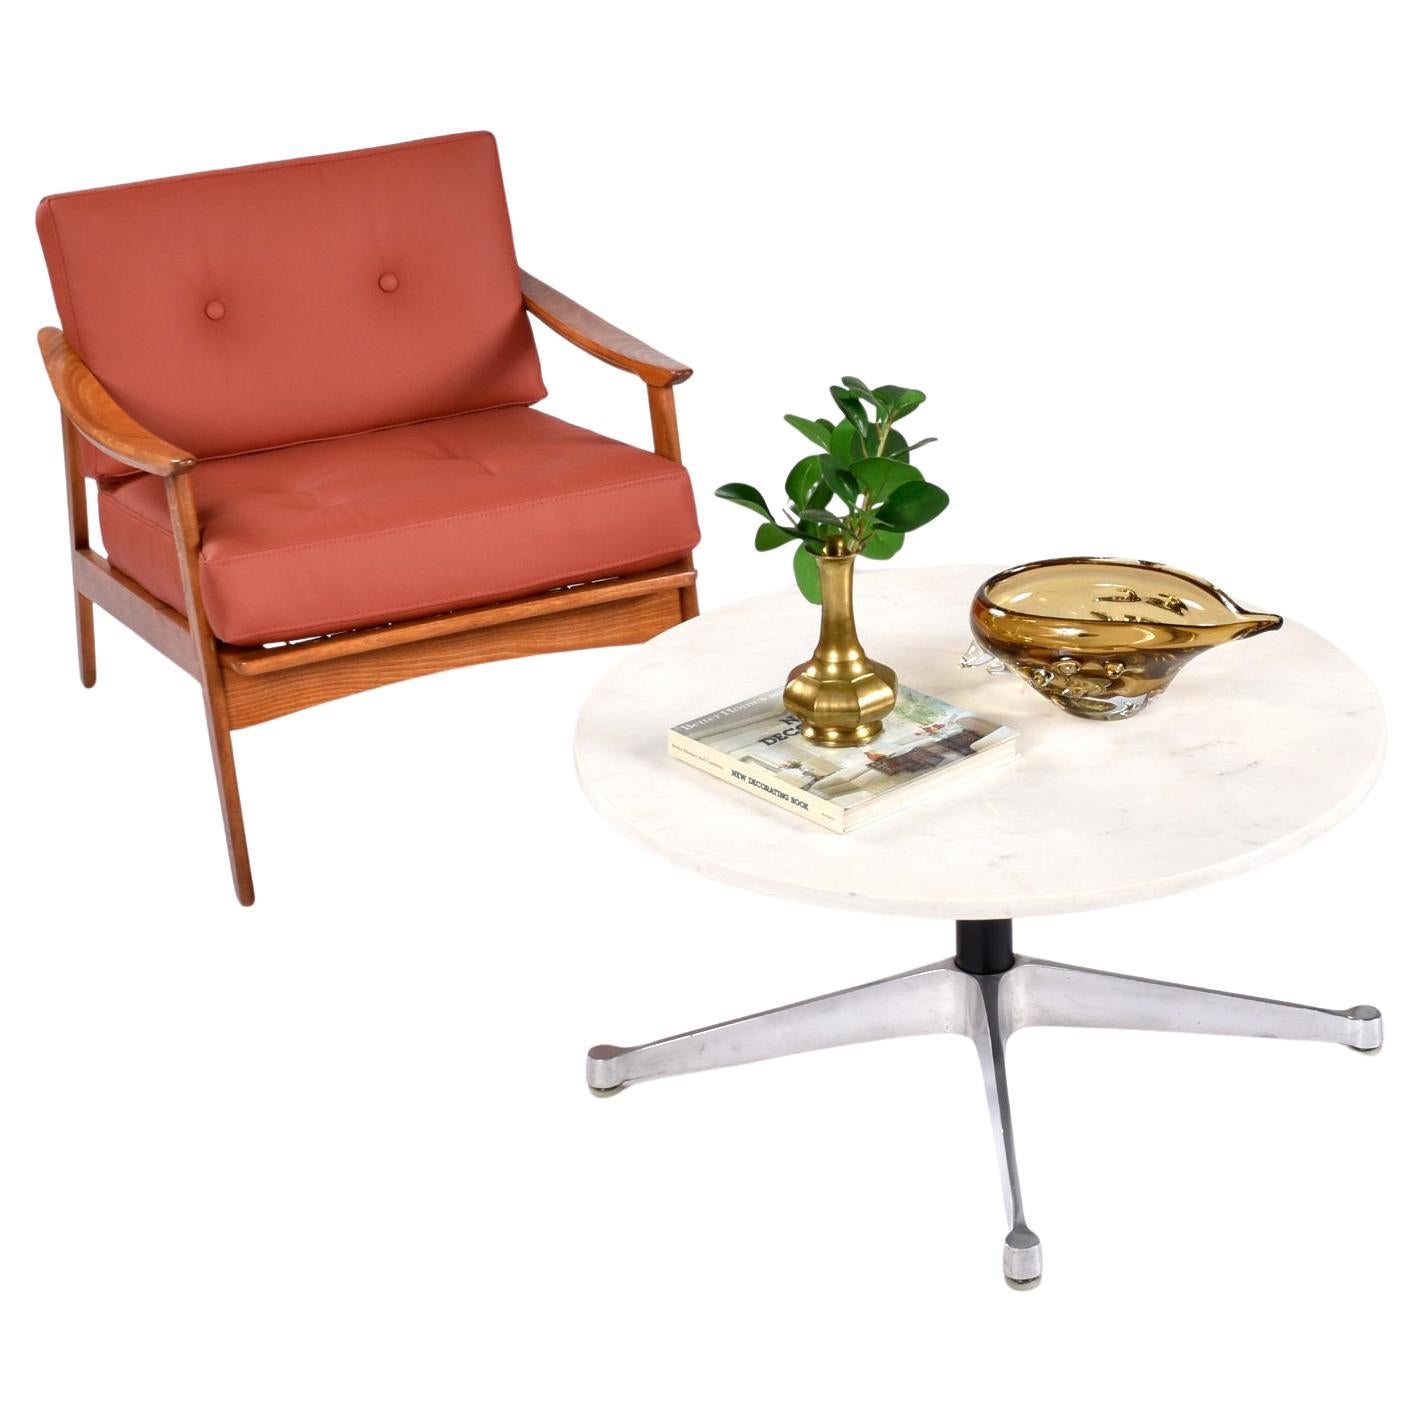 This listing is for the coffee table alone. The chair and accessories pictured are not included. 

Vintage Eames white marble coffee table for Herman Miller. The 32″ diameter coffee table rests on a classic Charles Eames aluminum contract base with